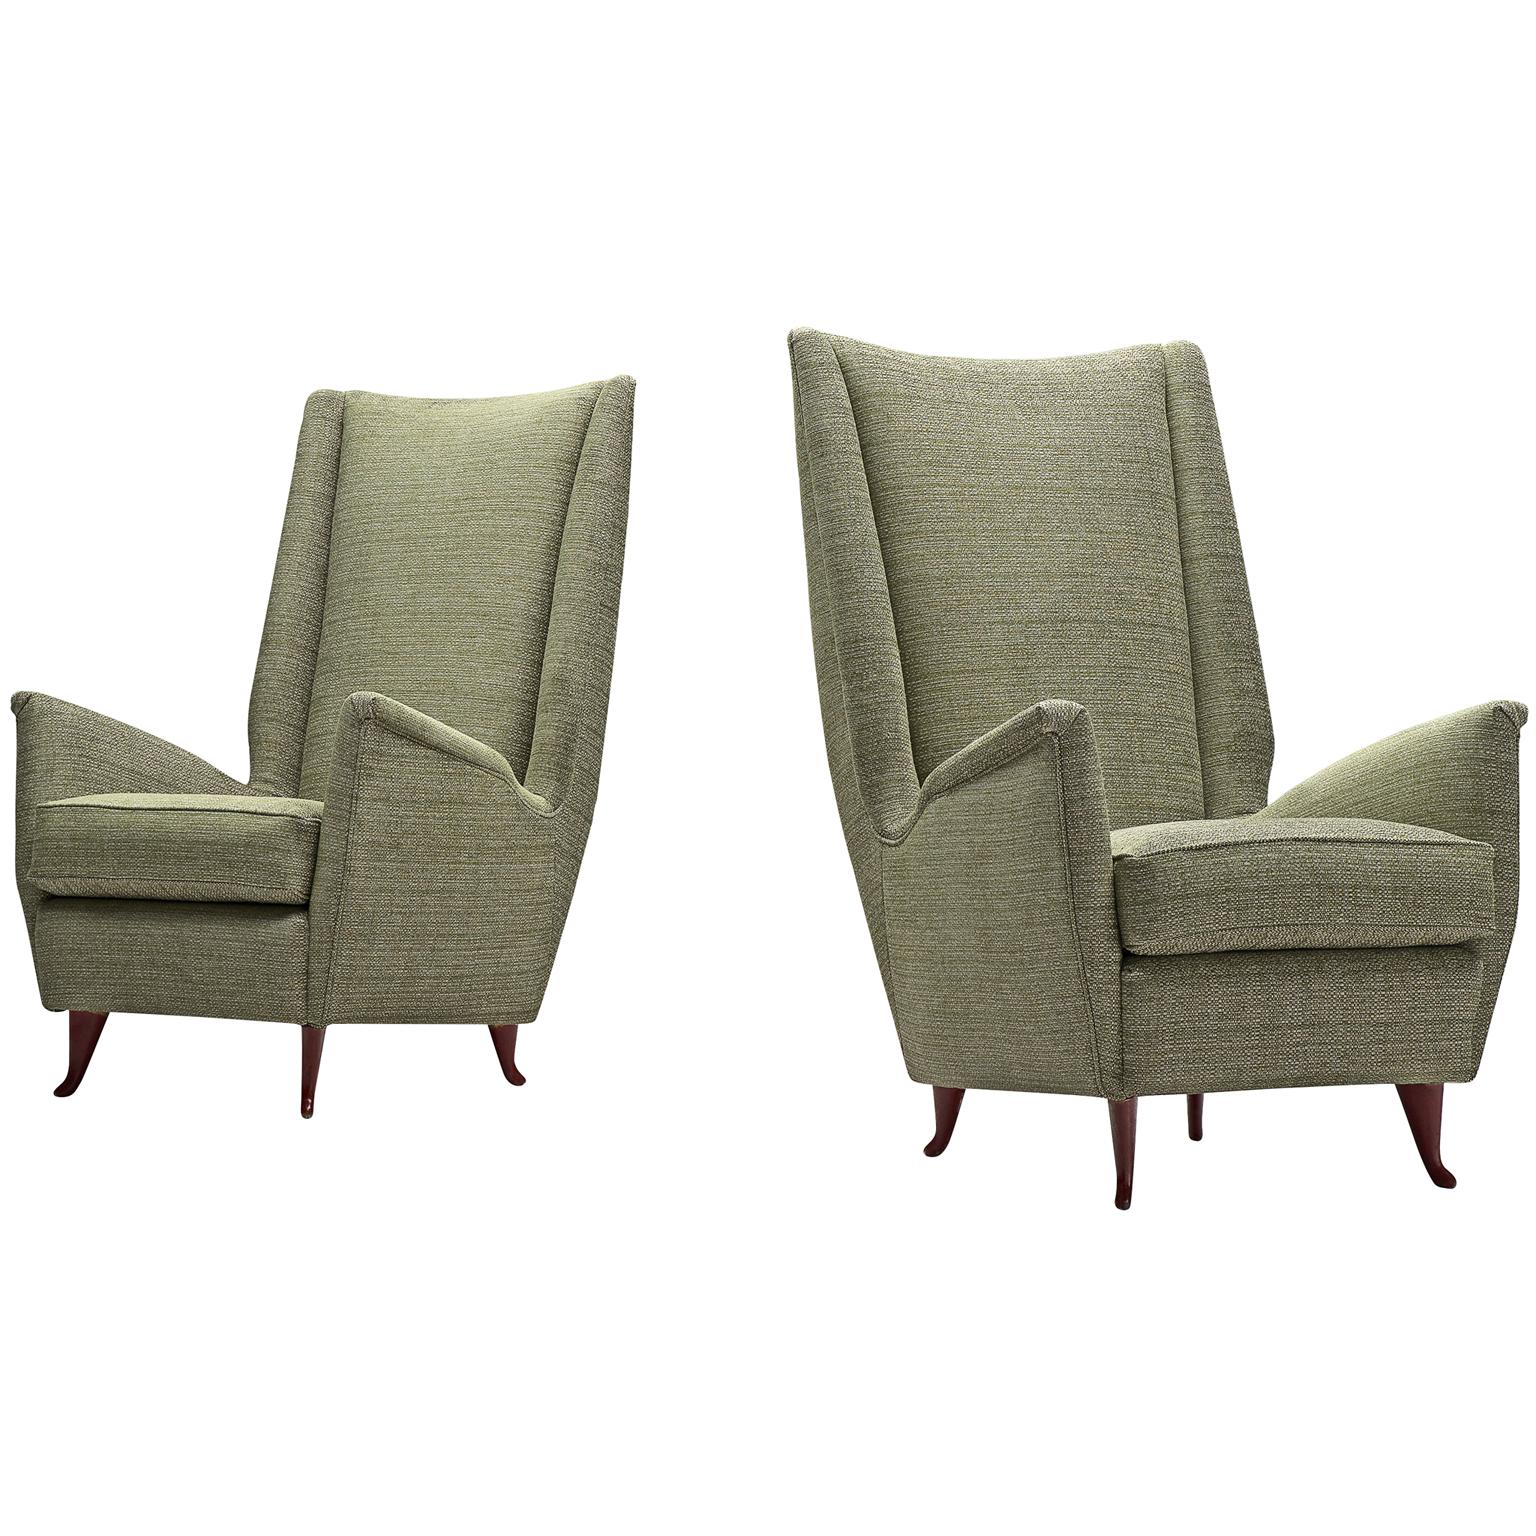 Pair of Reupholstered ISA Italian High Back Lounge Chair